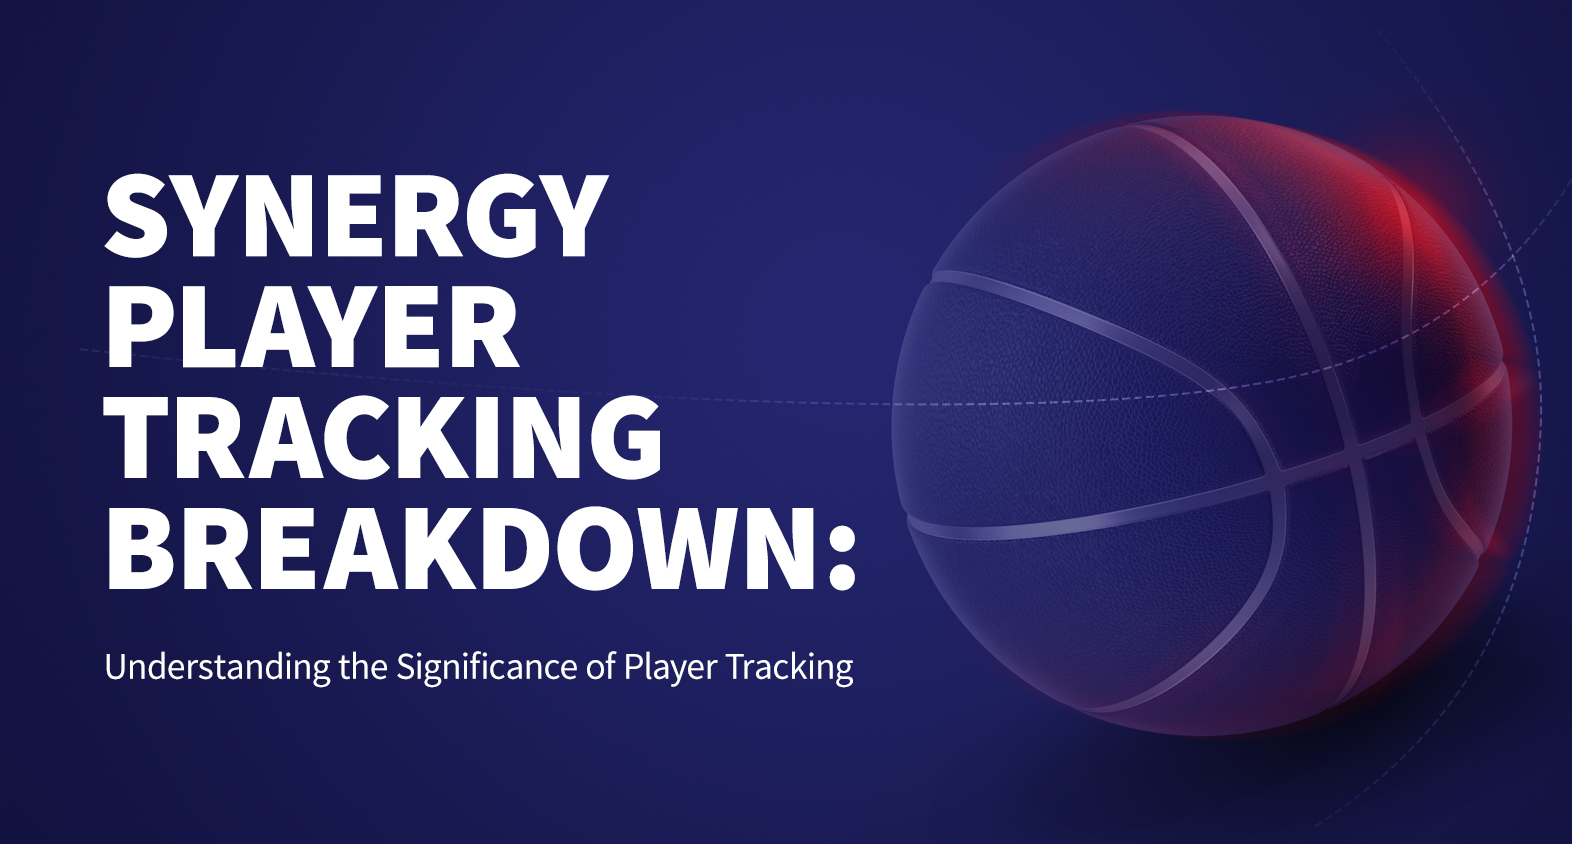 Synergy Player Tracking Breakdown Understanding the significance of player tracking